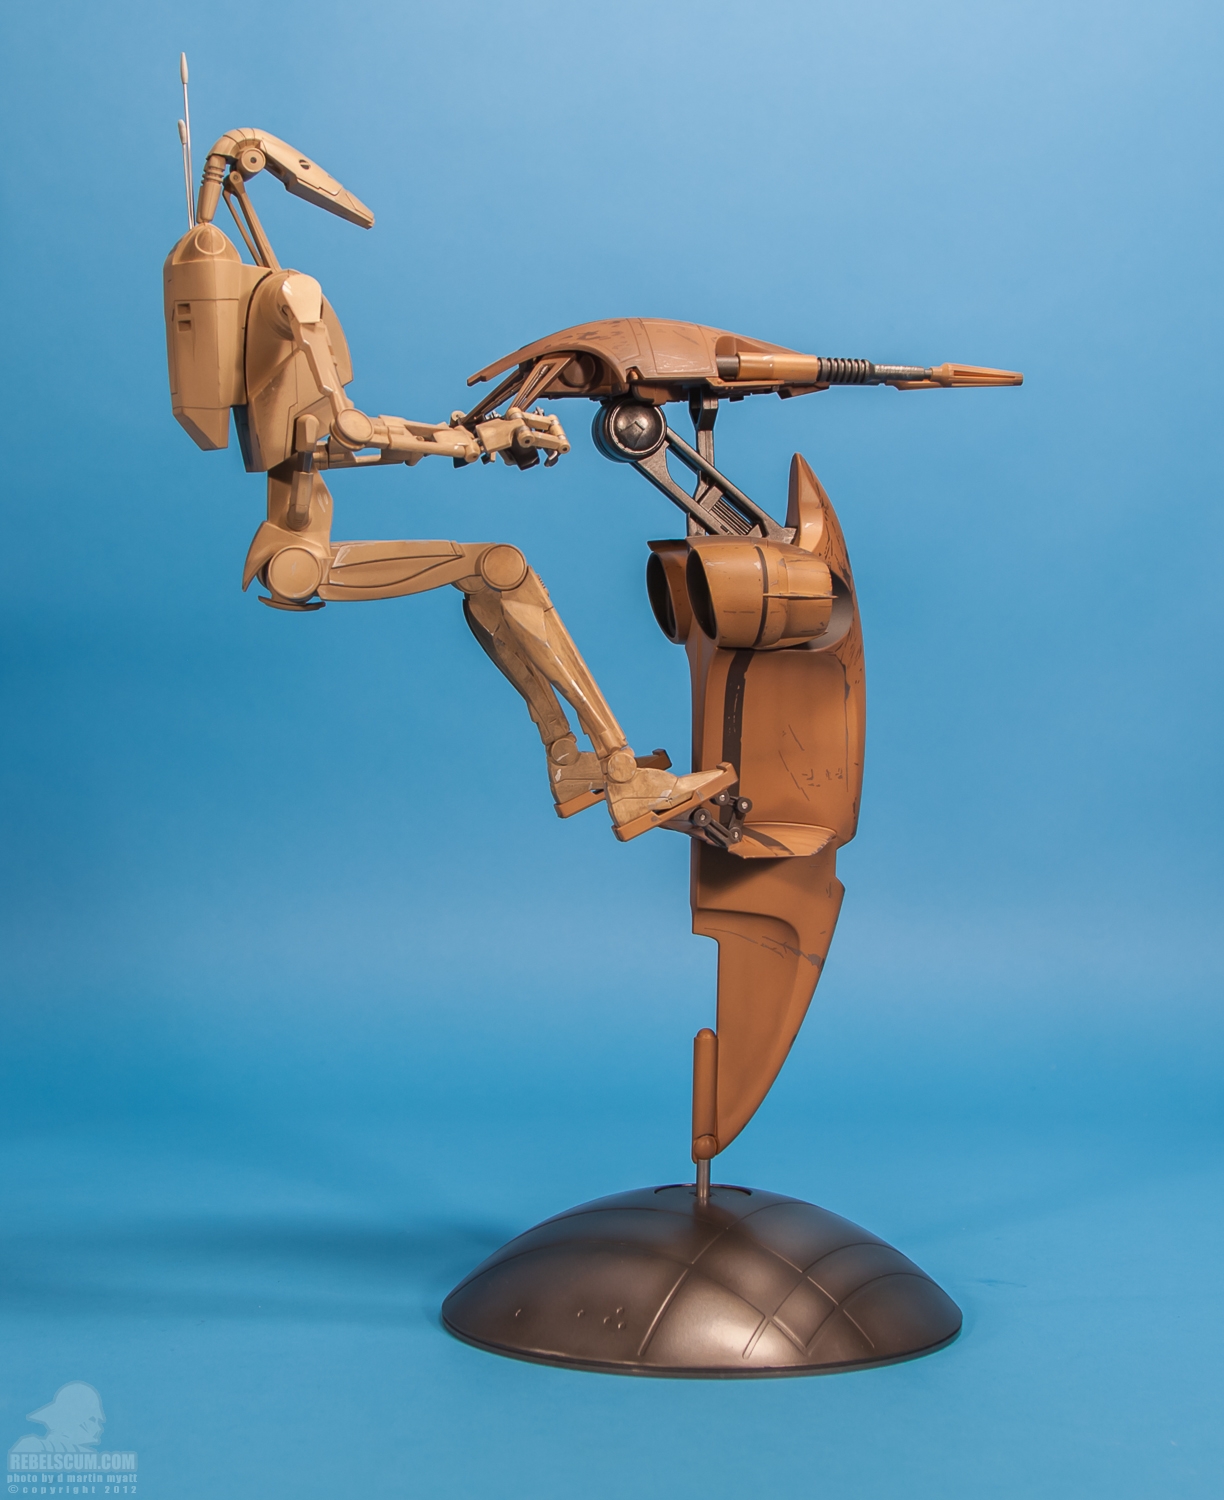 STAP_Battle_Droid_Star_Wars_Sideshow_Collectibles-39.jpg